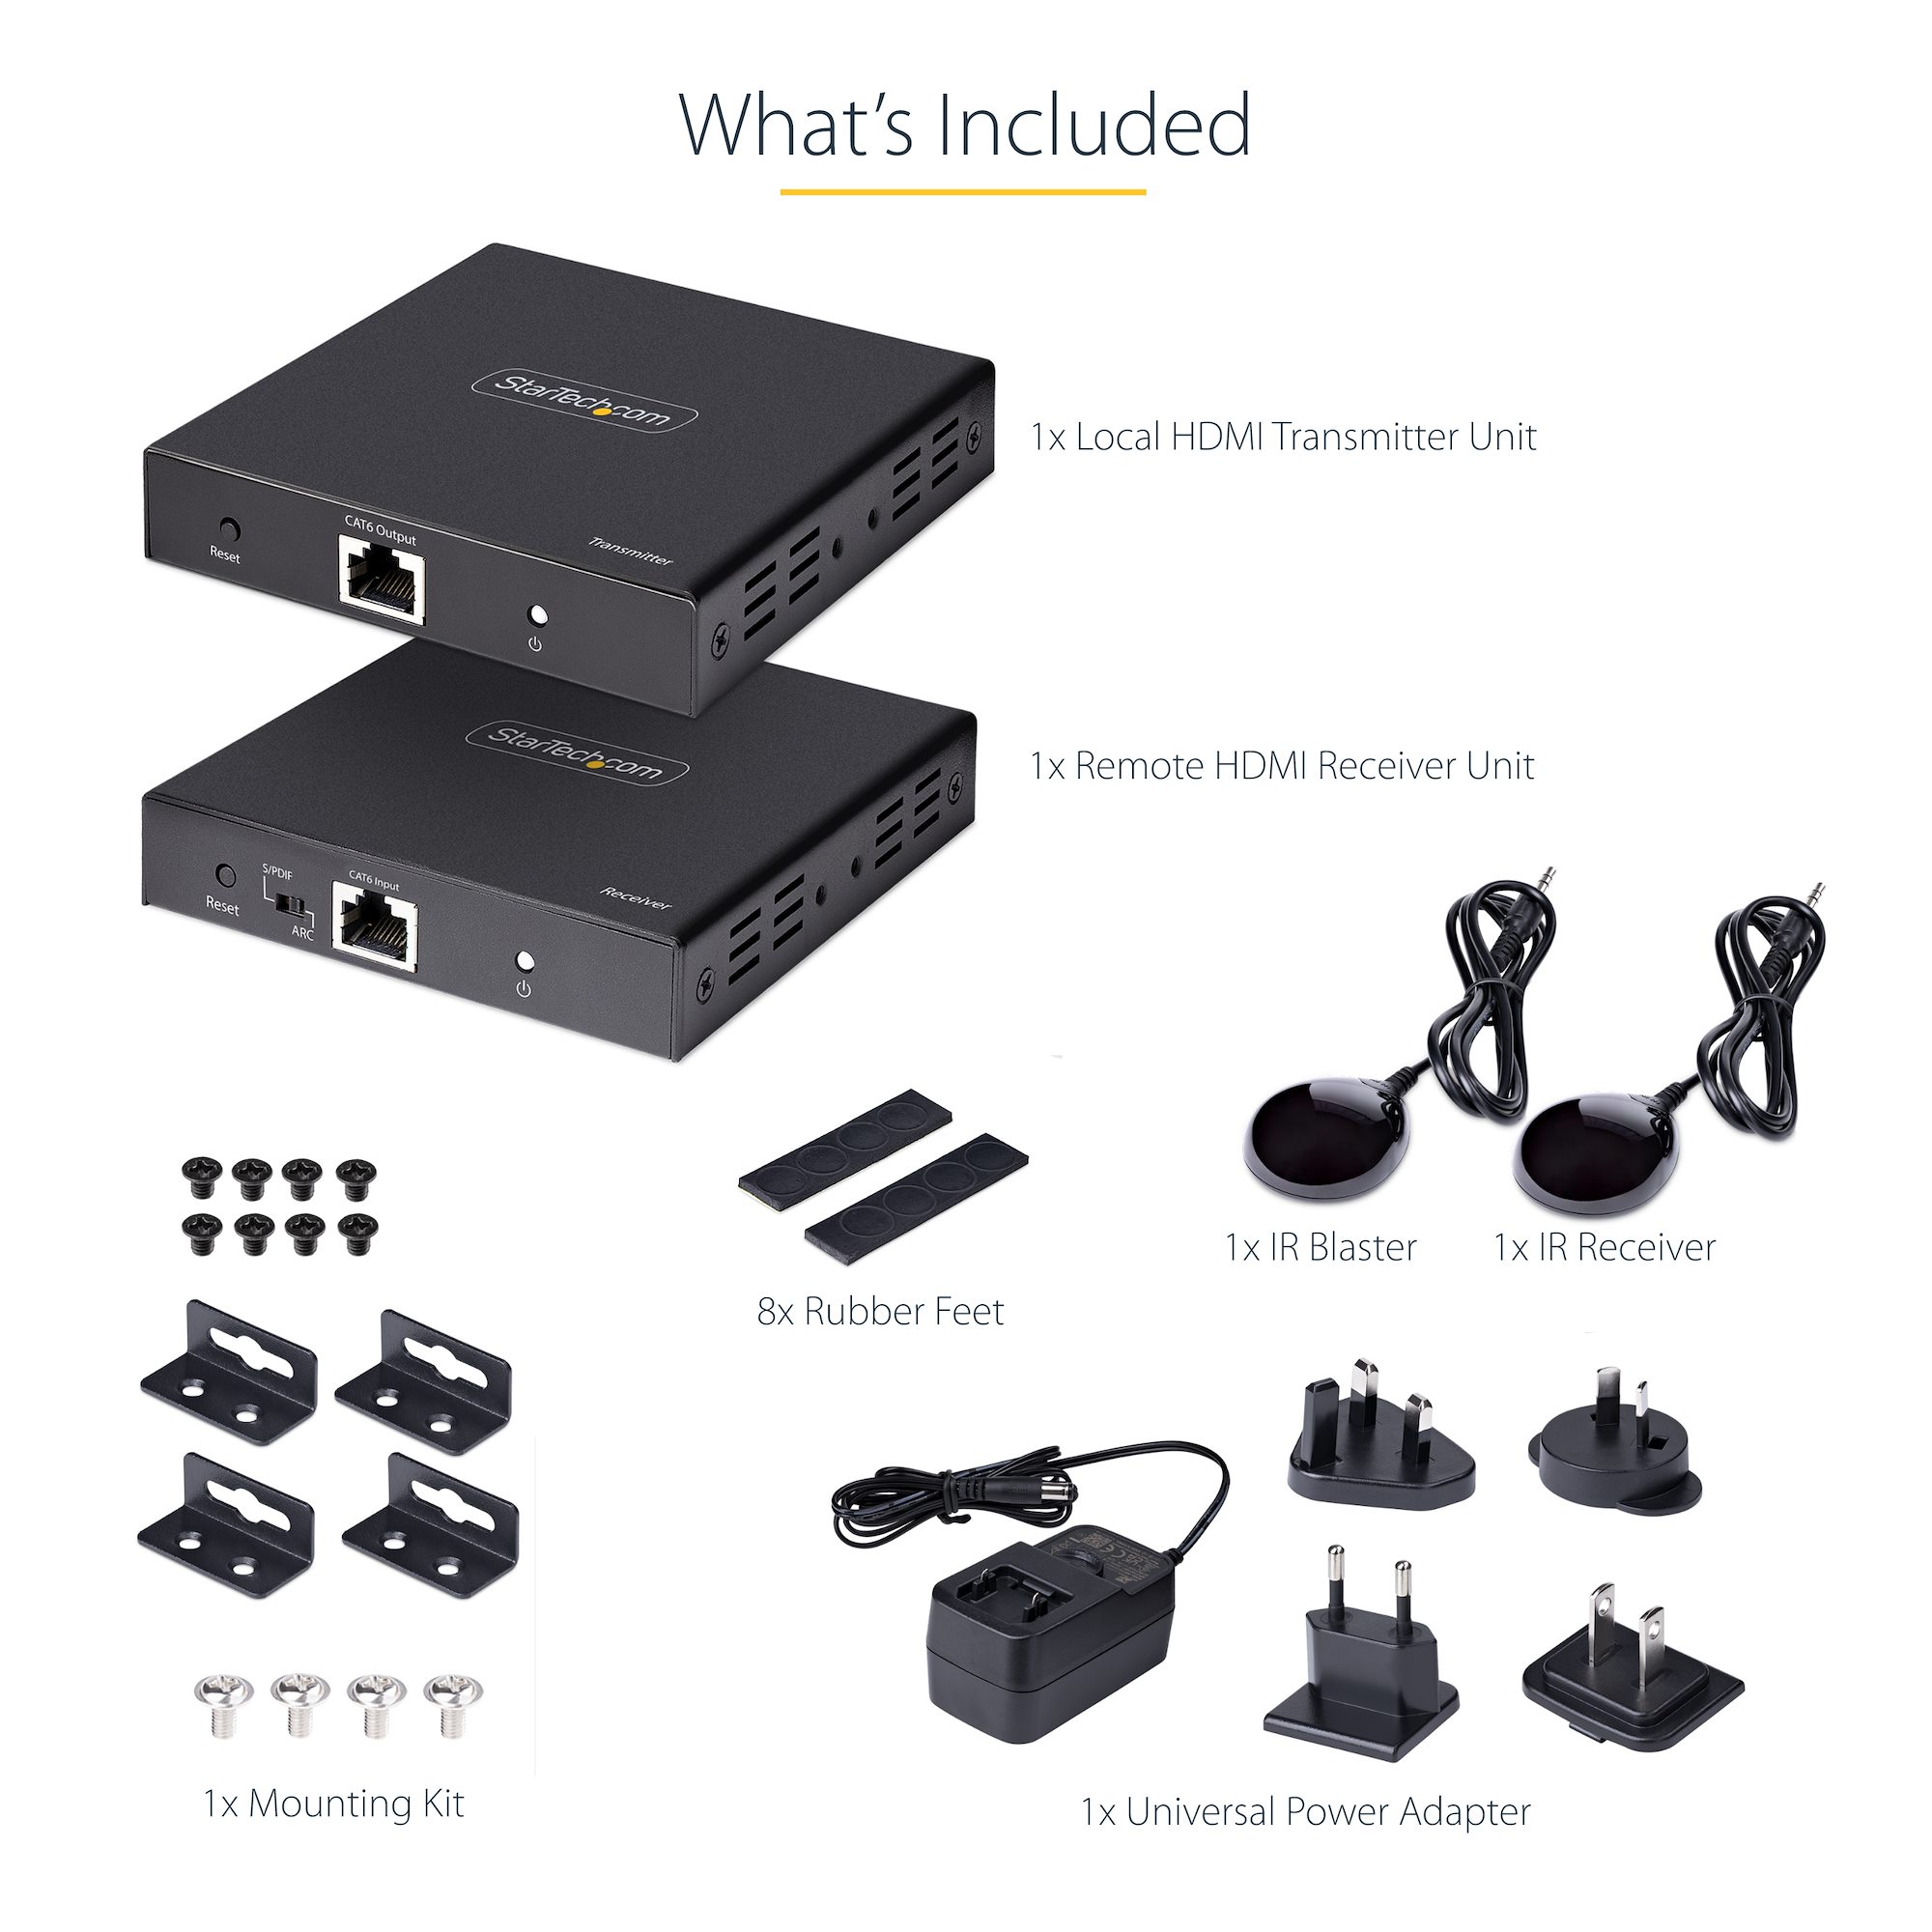 4K HDMI Extender Over CAT5/CAT6 Cable, 4K 60Hz HDR Video Extender Up to  230ft (70m), HDMI Over Ethernet Cabling, S/PDIF Audio Out, HDMI Transmitter